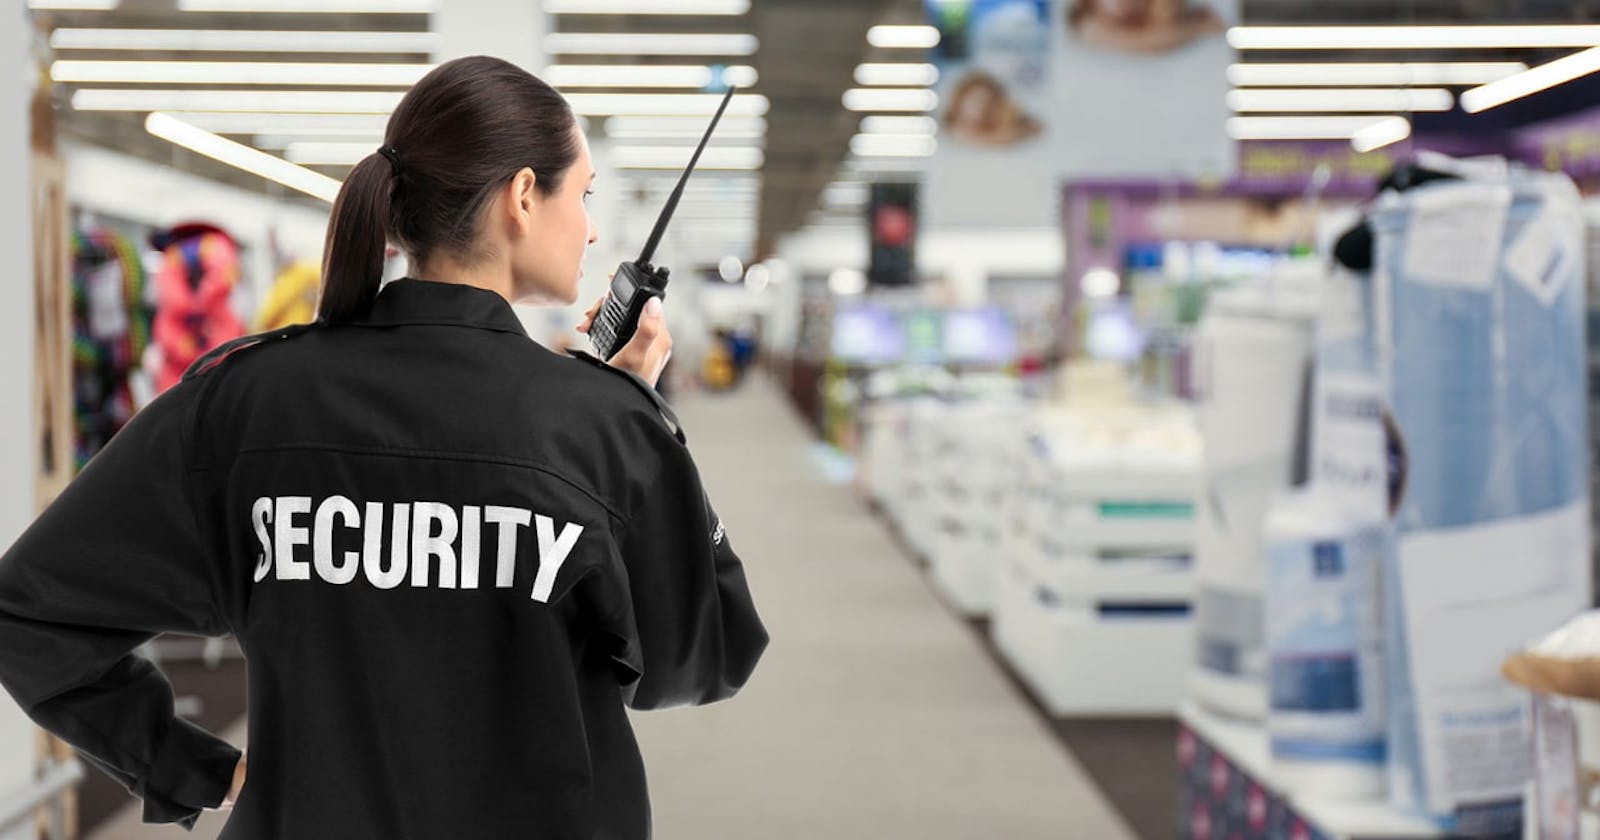 What is the main purpose of security?